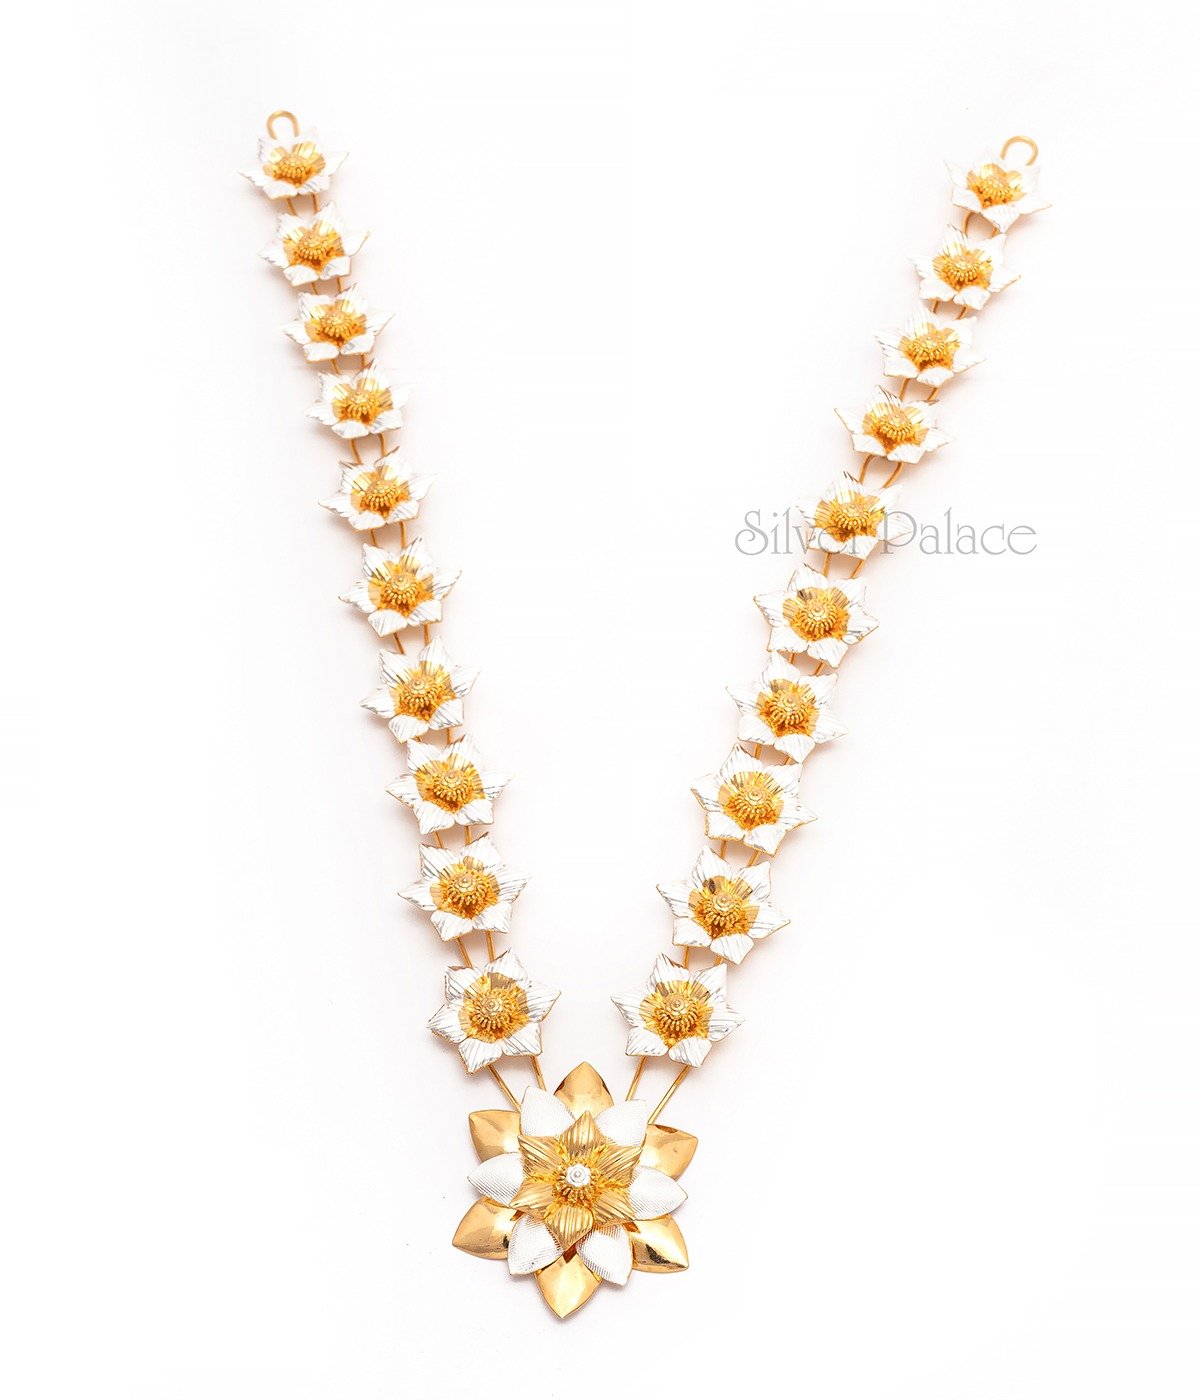   GOLD SILVER POLISHED FLORAL NECKLACE